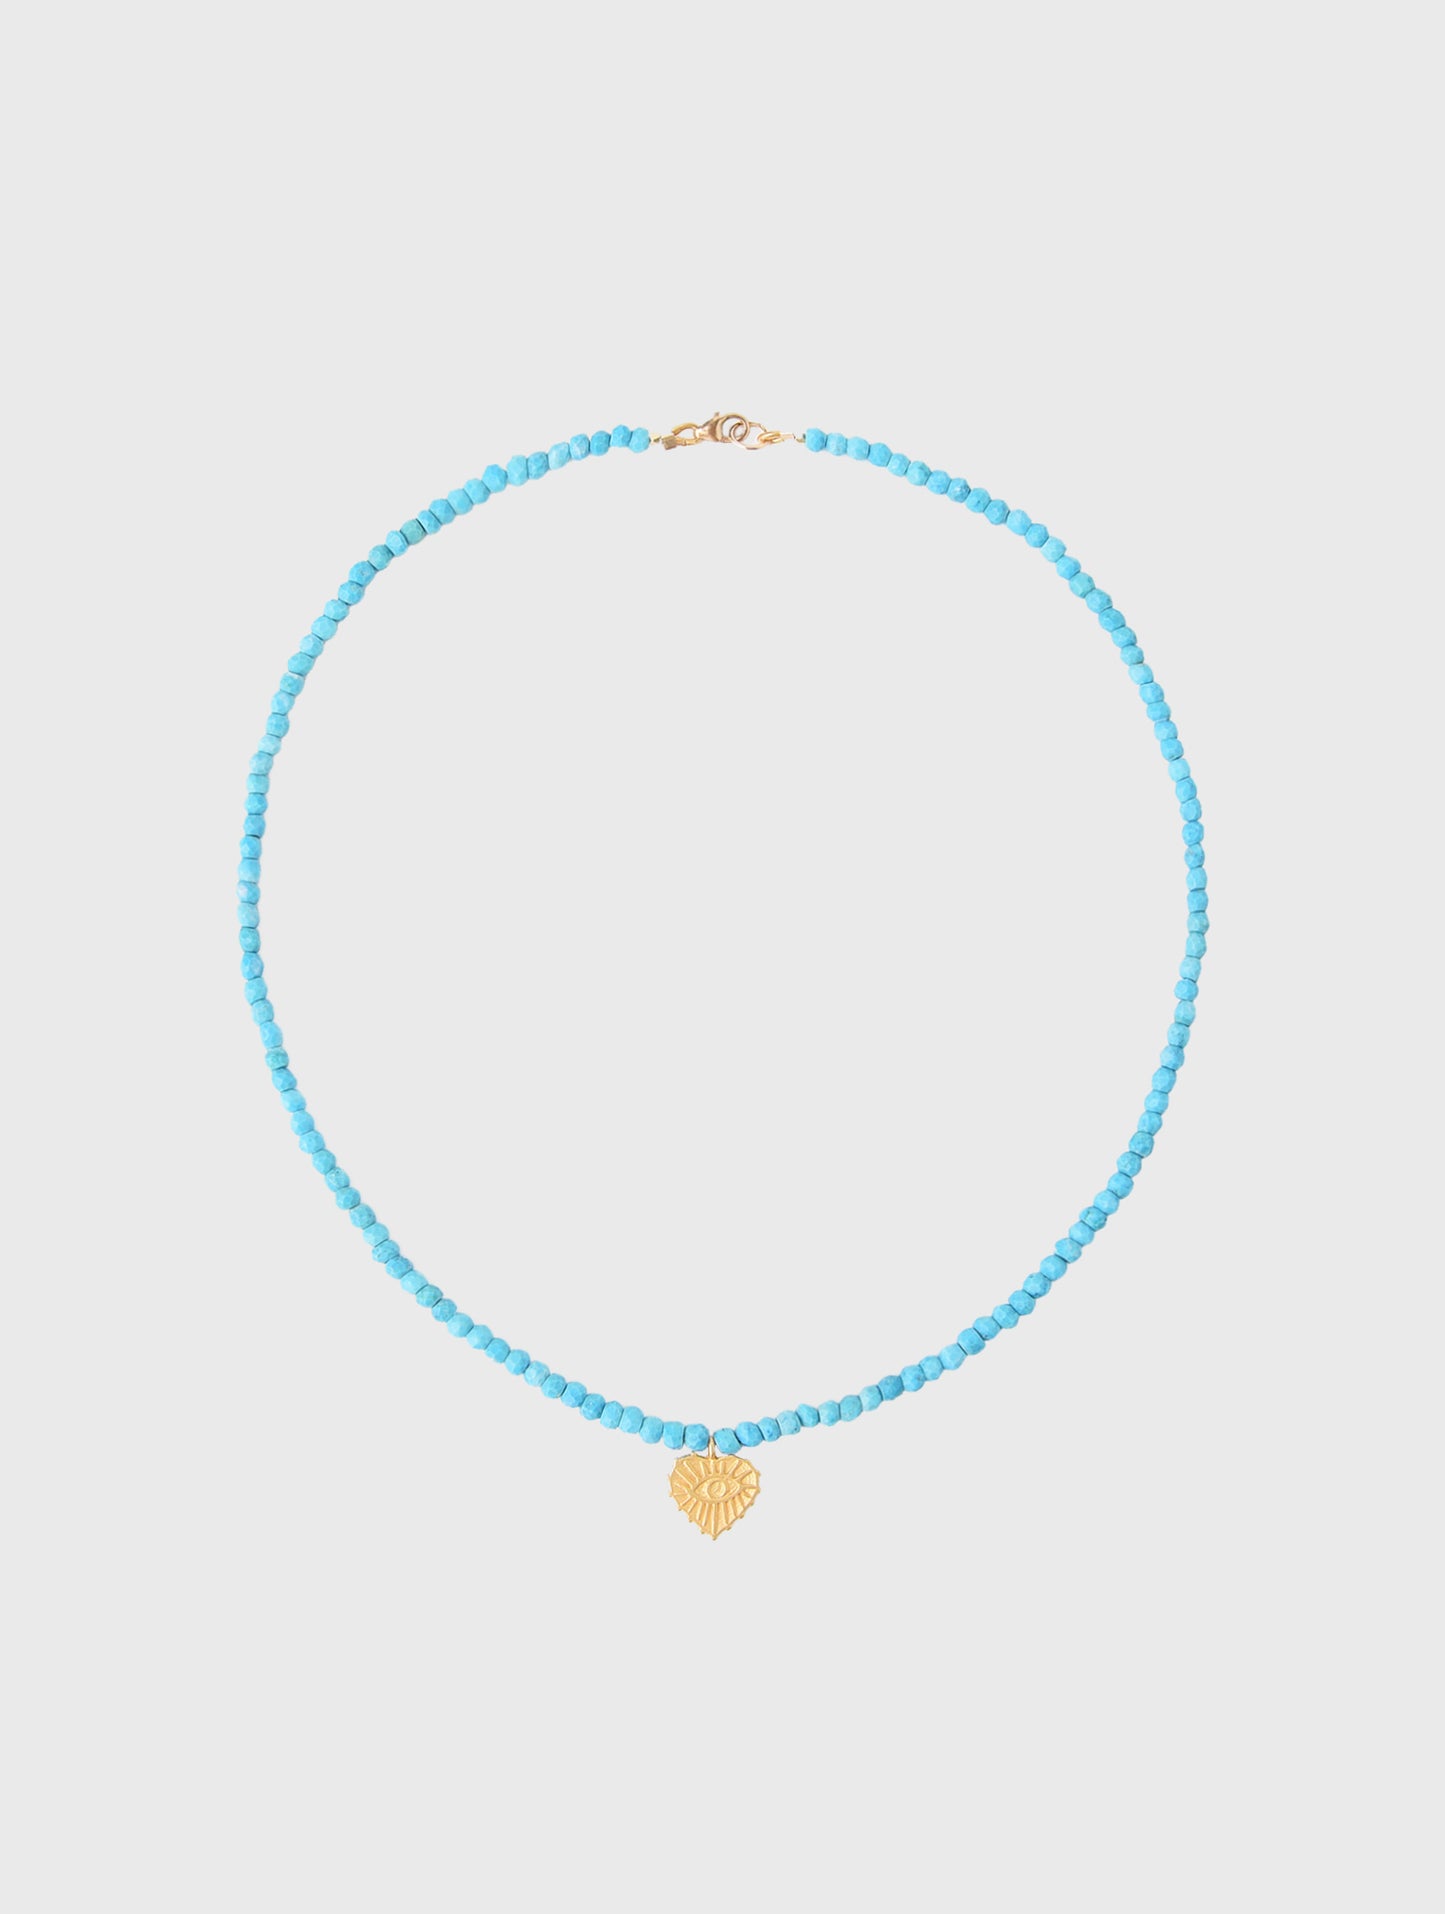 Annie O'Grady Designs Turquoise Beads On Silk Thread With Heart Charm Necklace